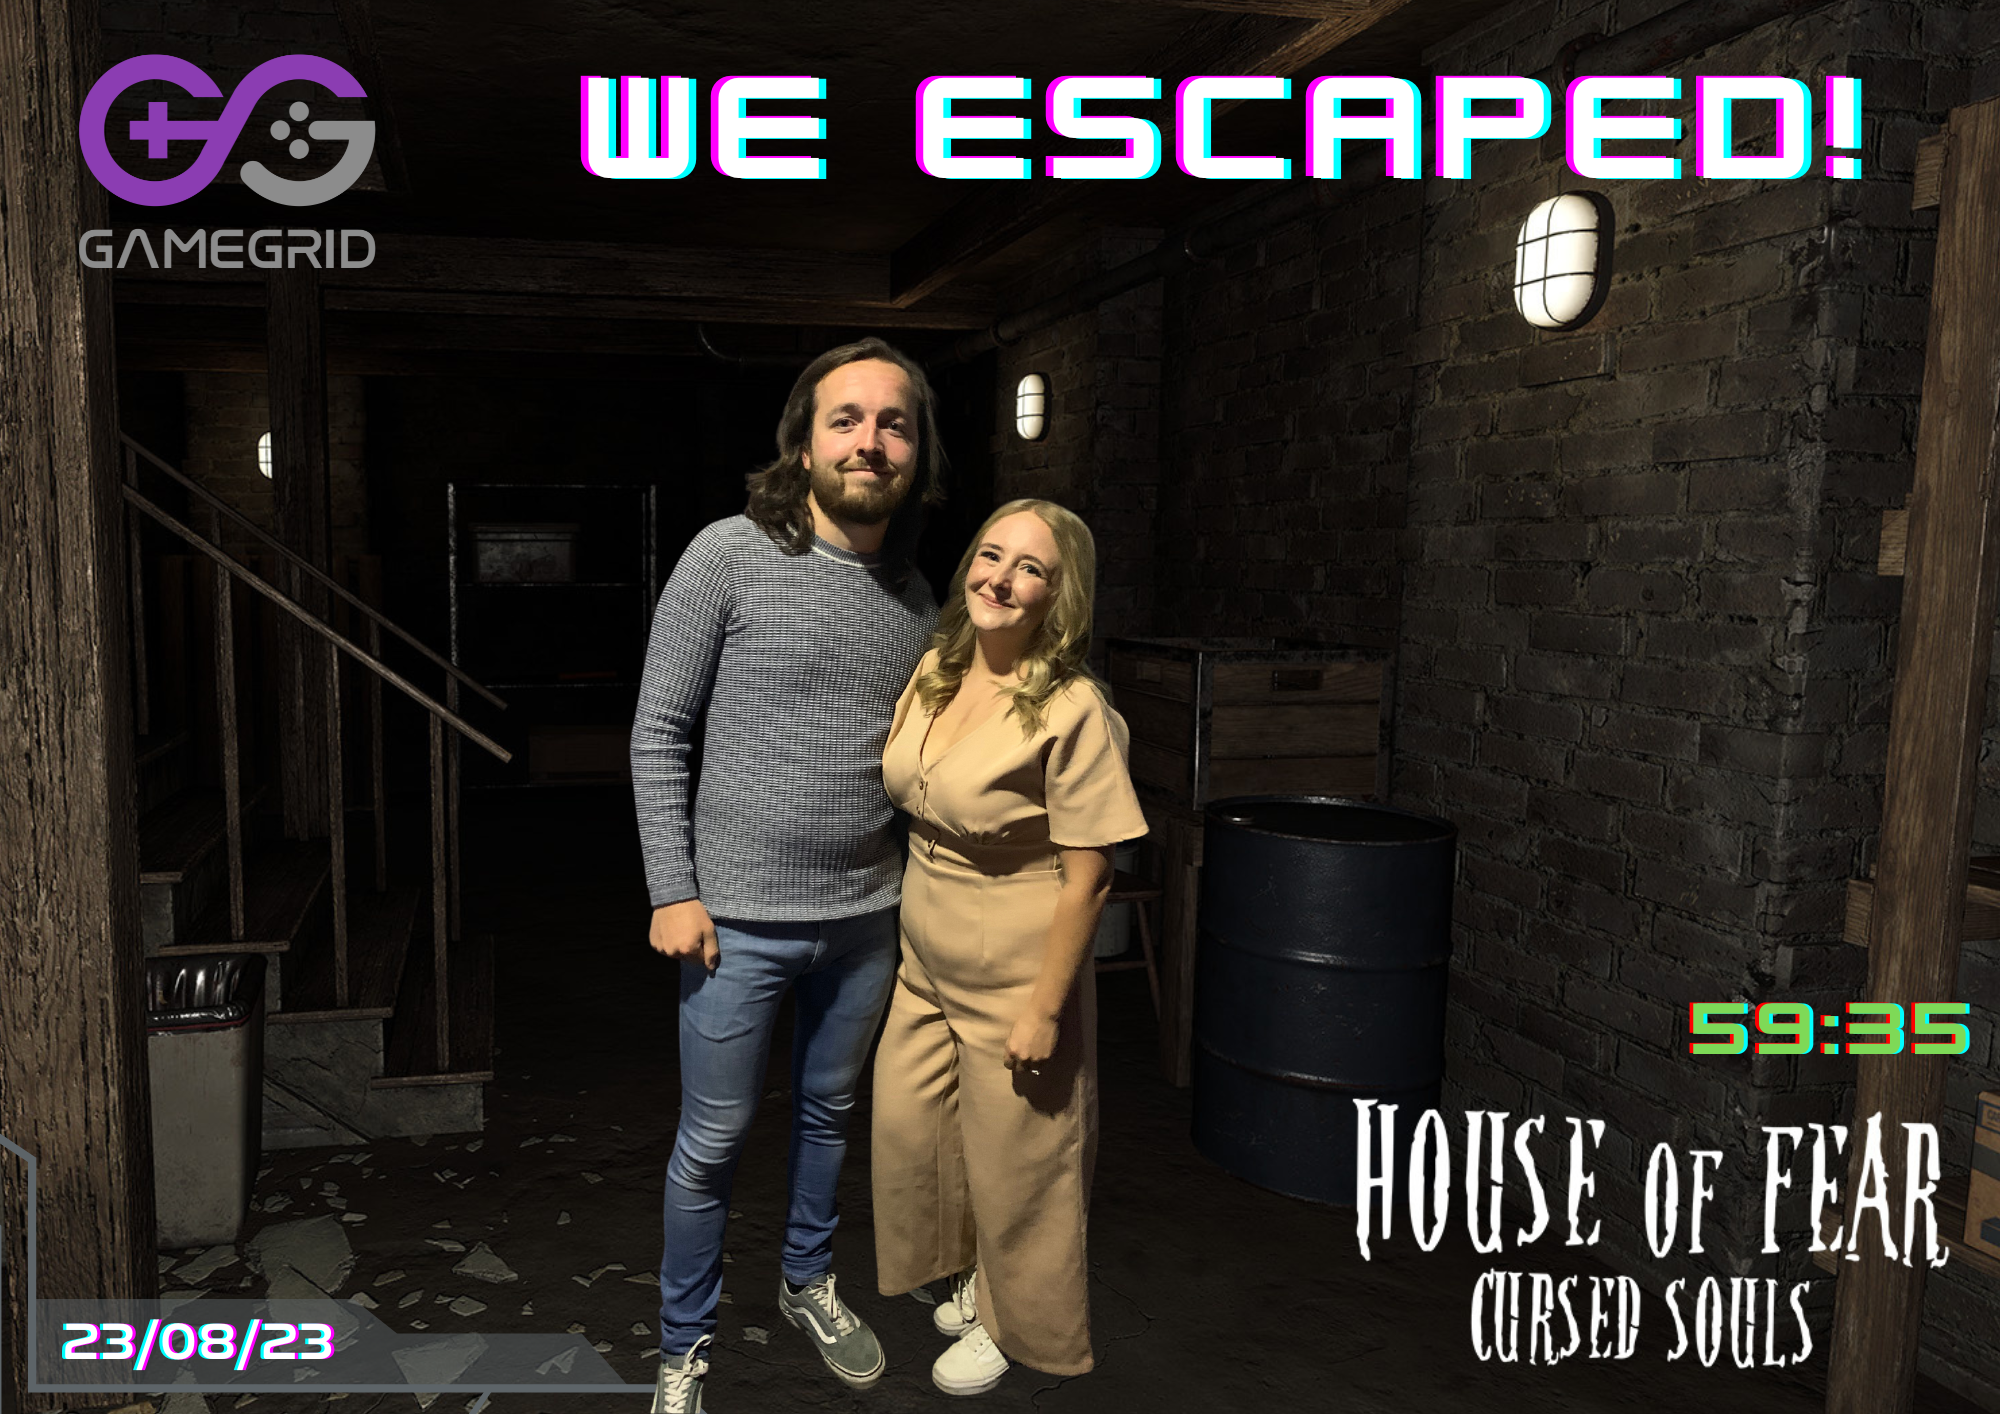 House of Fear Cursed Souls - 23 08 23